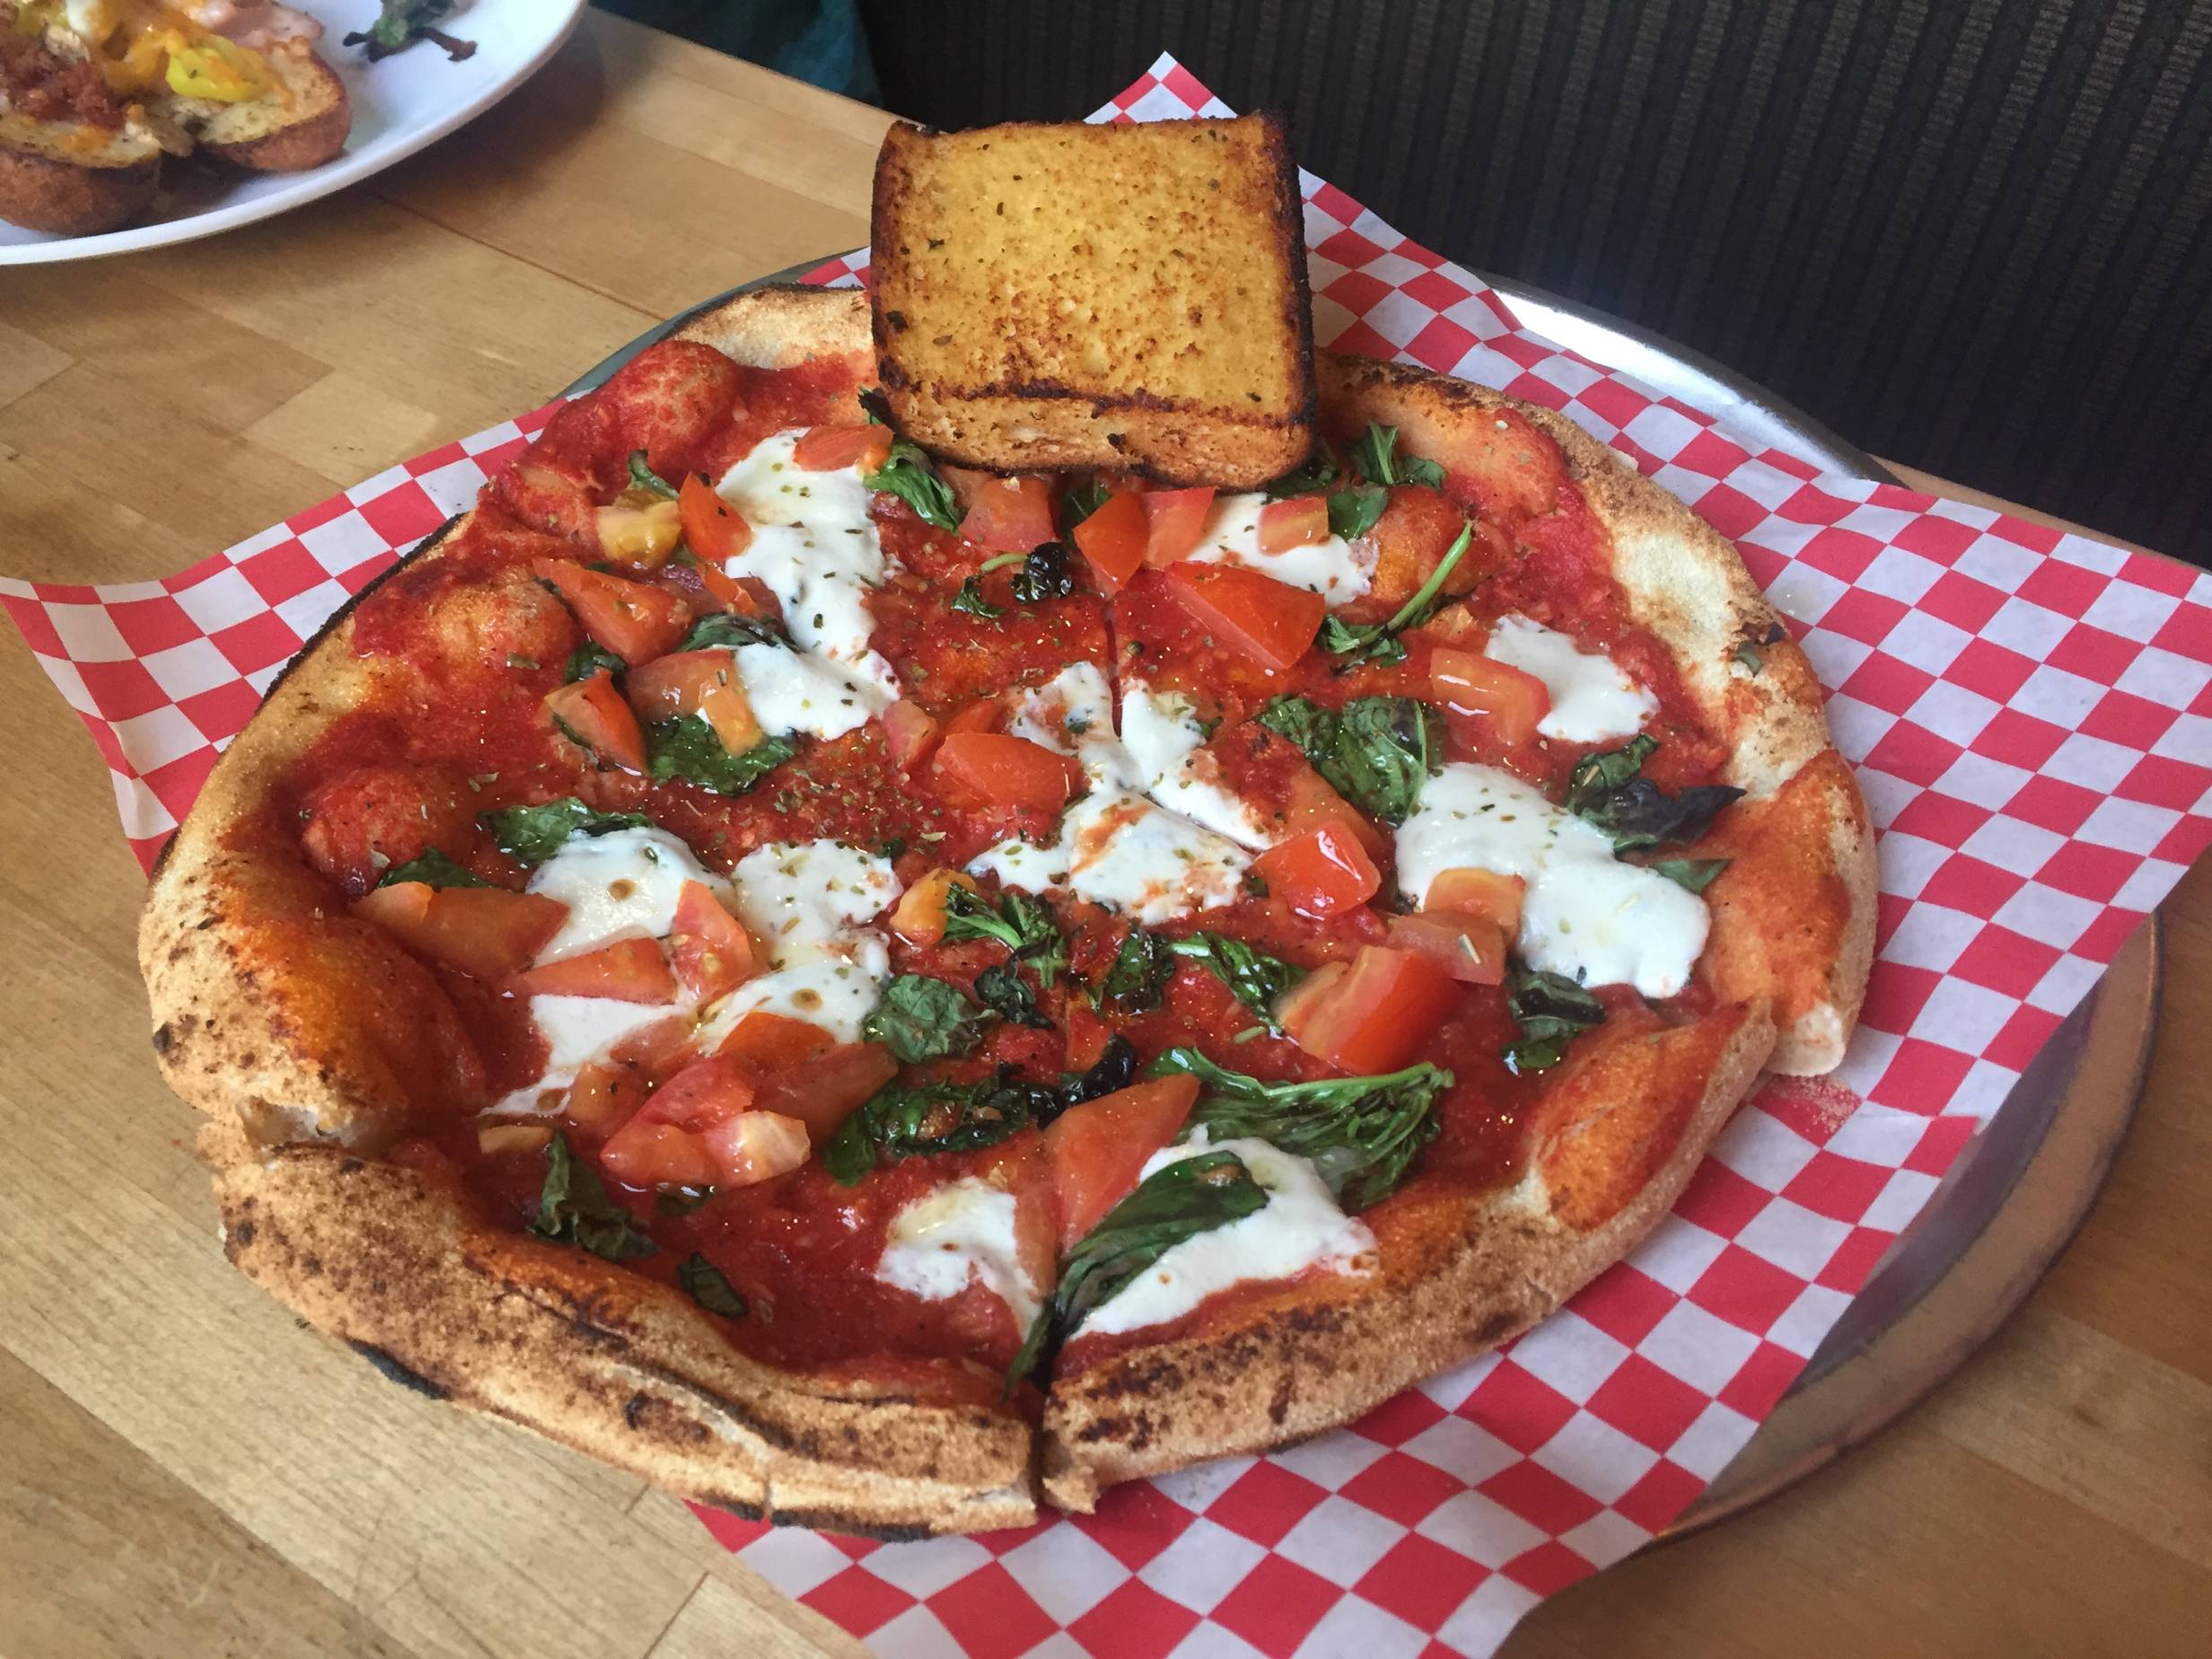 An individual-sized margherita pizza with a slice of garlic bread balanced on the crust. It is served on red and white check paper.